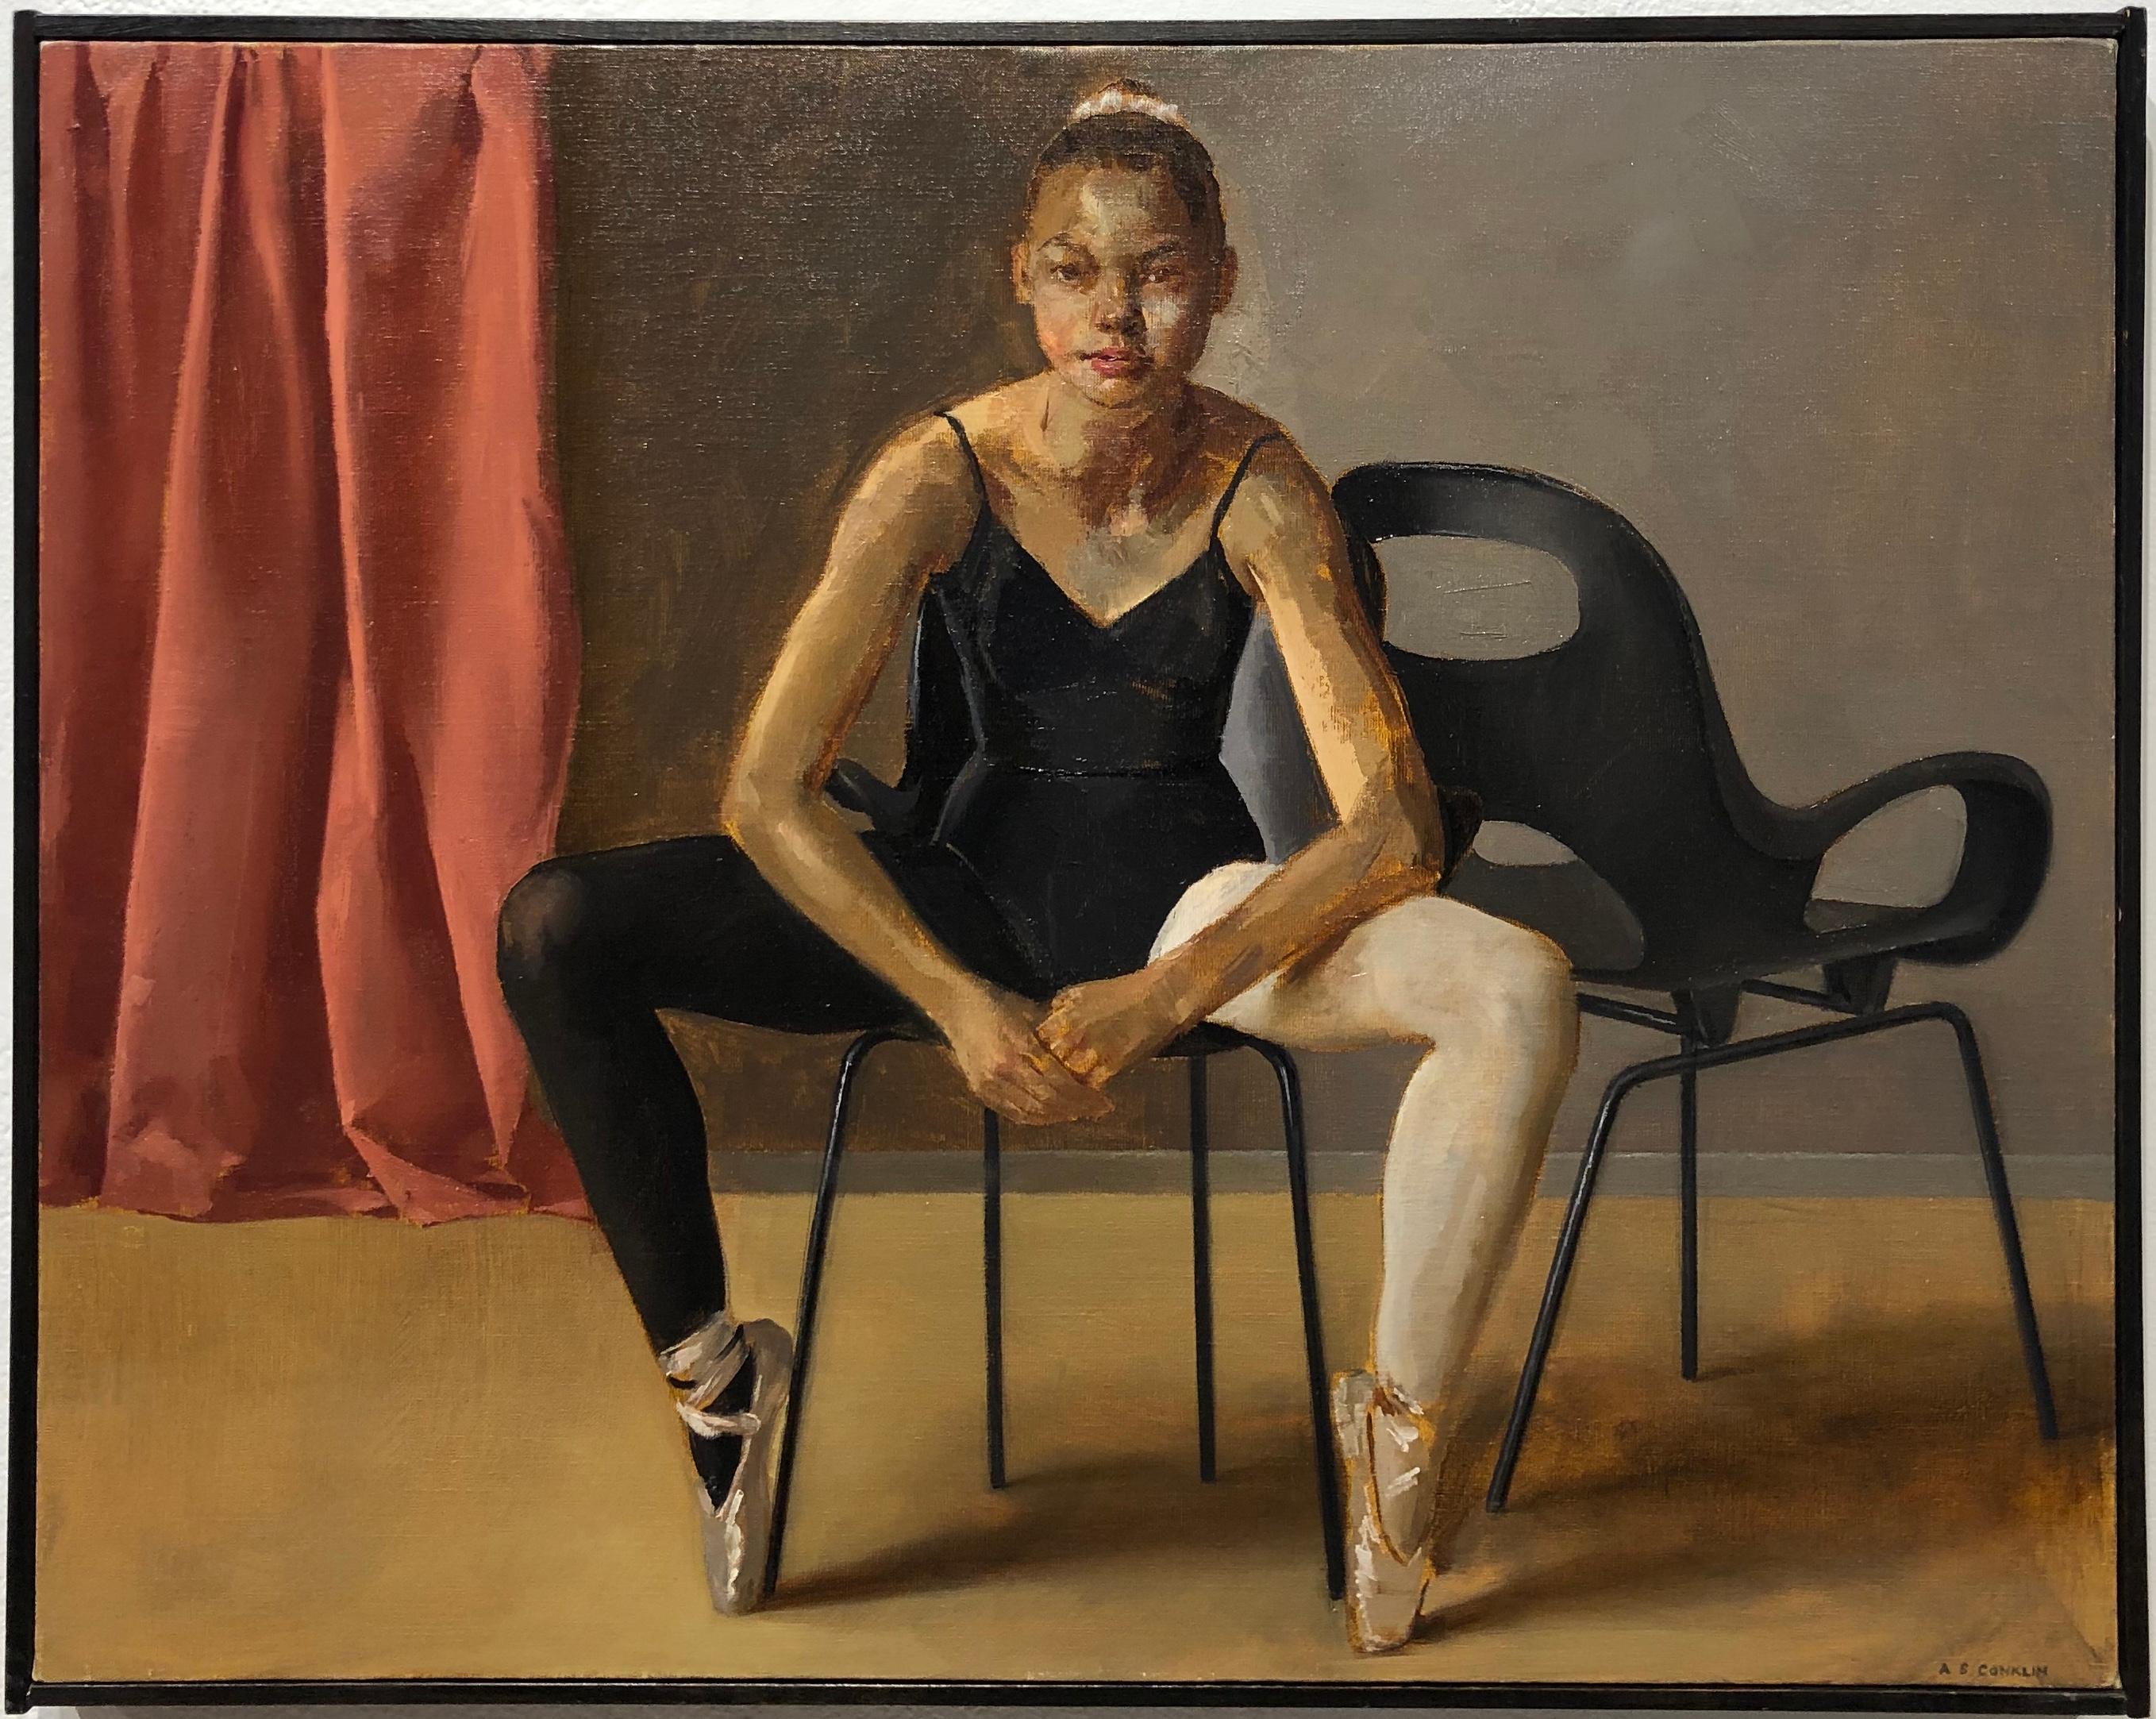 August in Leotard Seated on Oh Chair, Female Dancer, Original Oil on Panel - Painting by Andrew S. Conklin